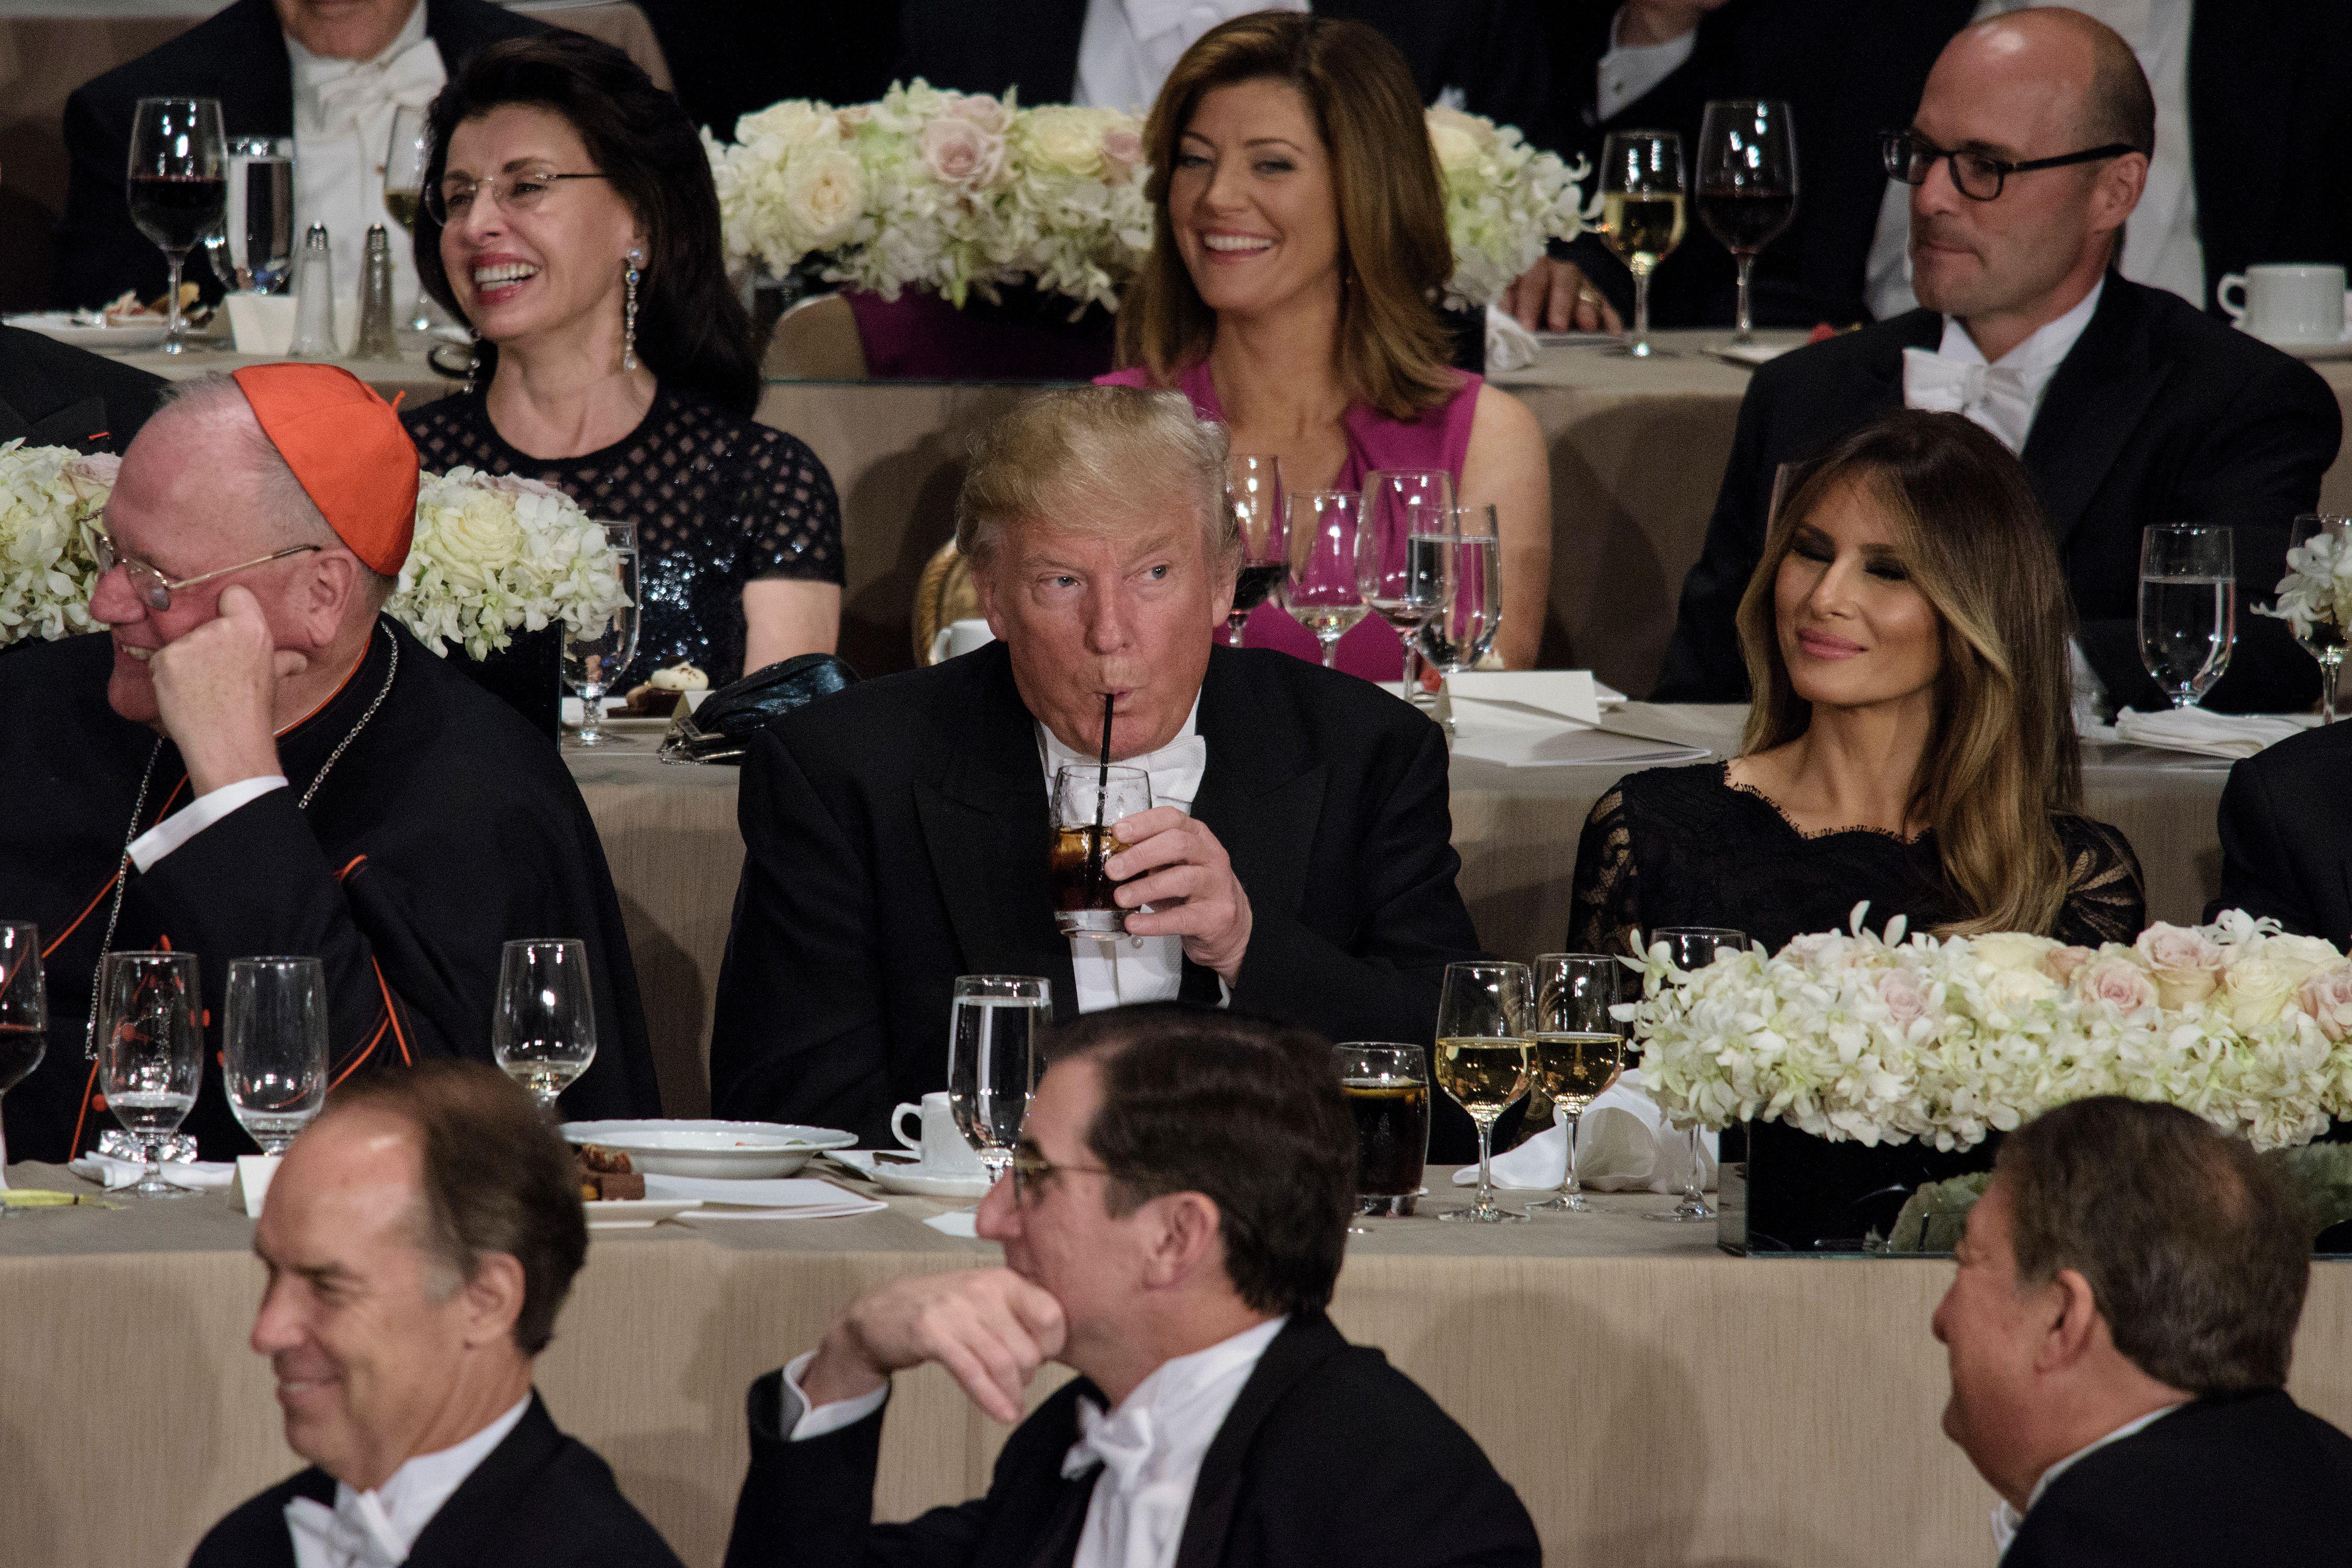 From left Cardinal Timothy Dolan, Archbishop of New York, Republican presidential nominee Donald Trump, Melania Trump and others listen as Democratic presidential nominee Hillary Clinton speaks during the Alfred E. Smith Memorial Foundation Dinner at Waldorf Astoria October 20, 2016 in New York, New York. / AFP / Brendan Smialowski        (Photo credit should read BRENDAN SMIALOWSKI/AFP/Getty Images)